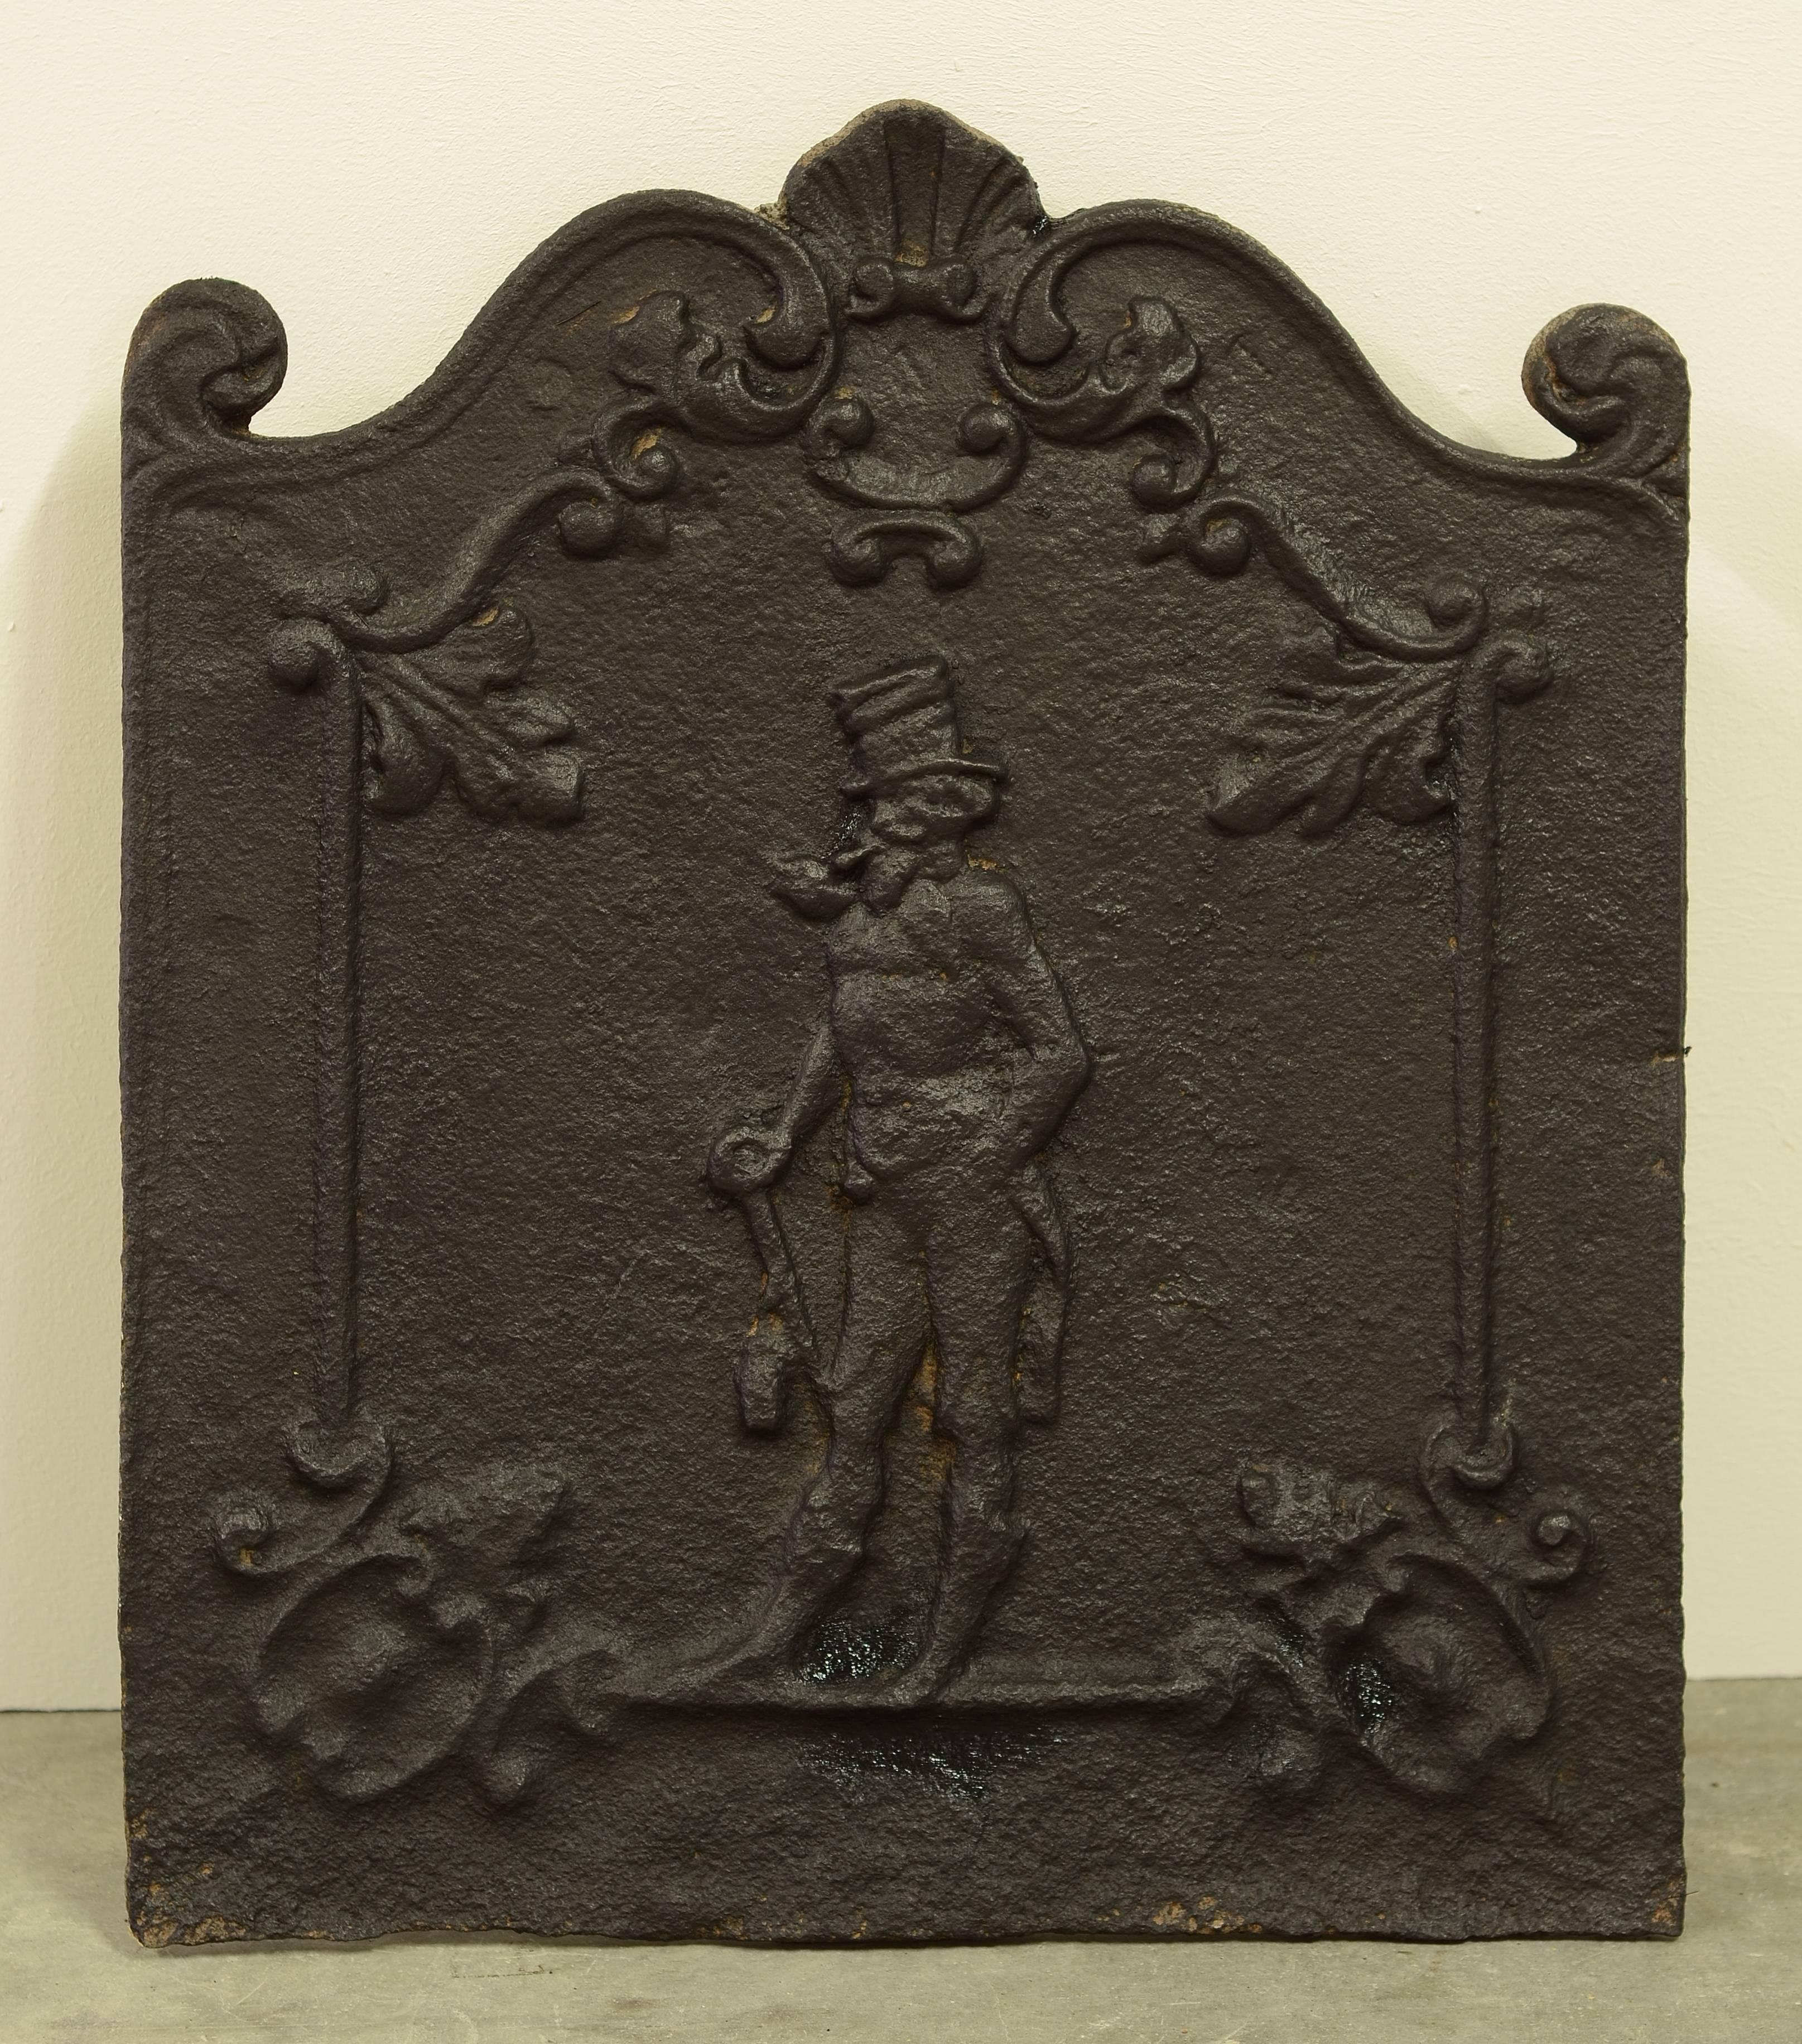 Little cast iron fireback showing a man with a top hat, very decorative.

Excellent condition, can be used in a fireplace or as a backsplash.
 